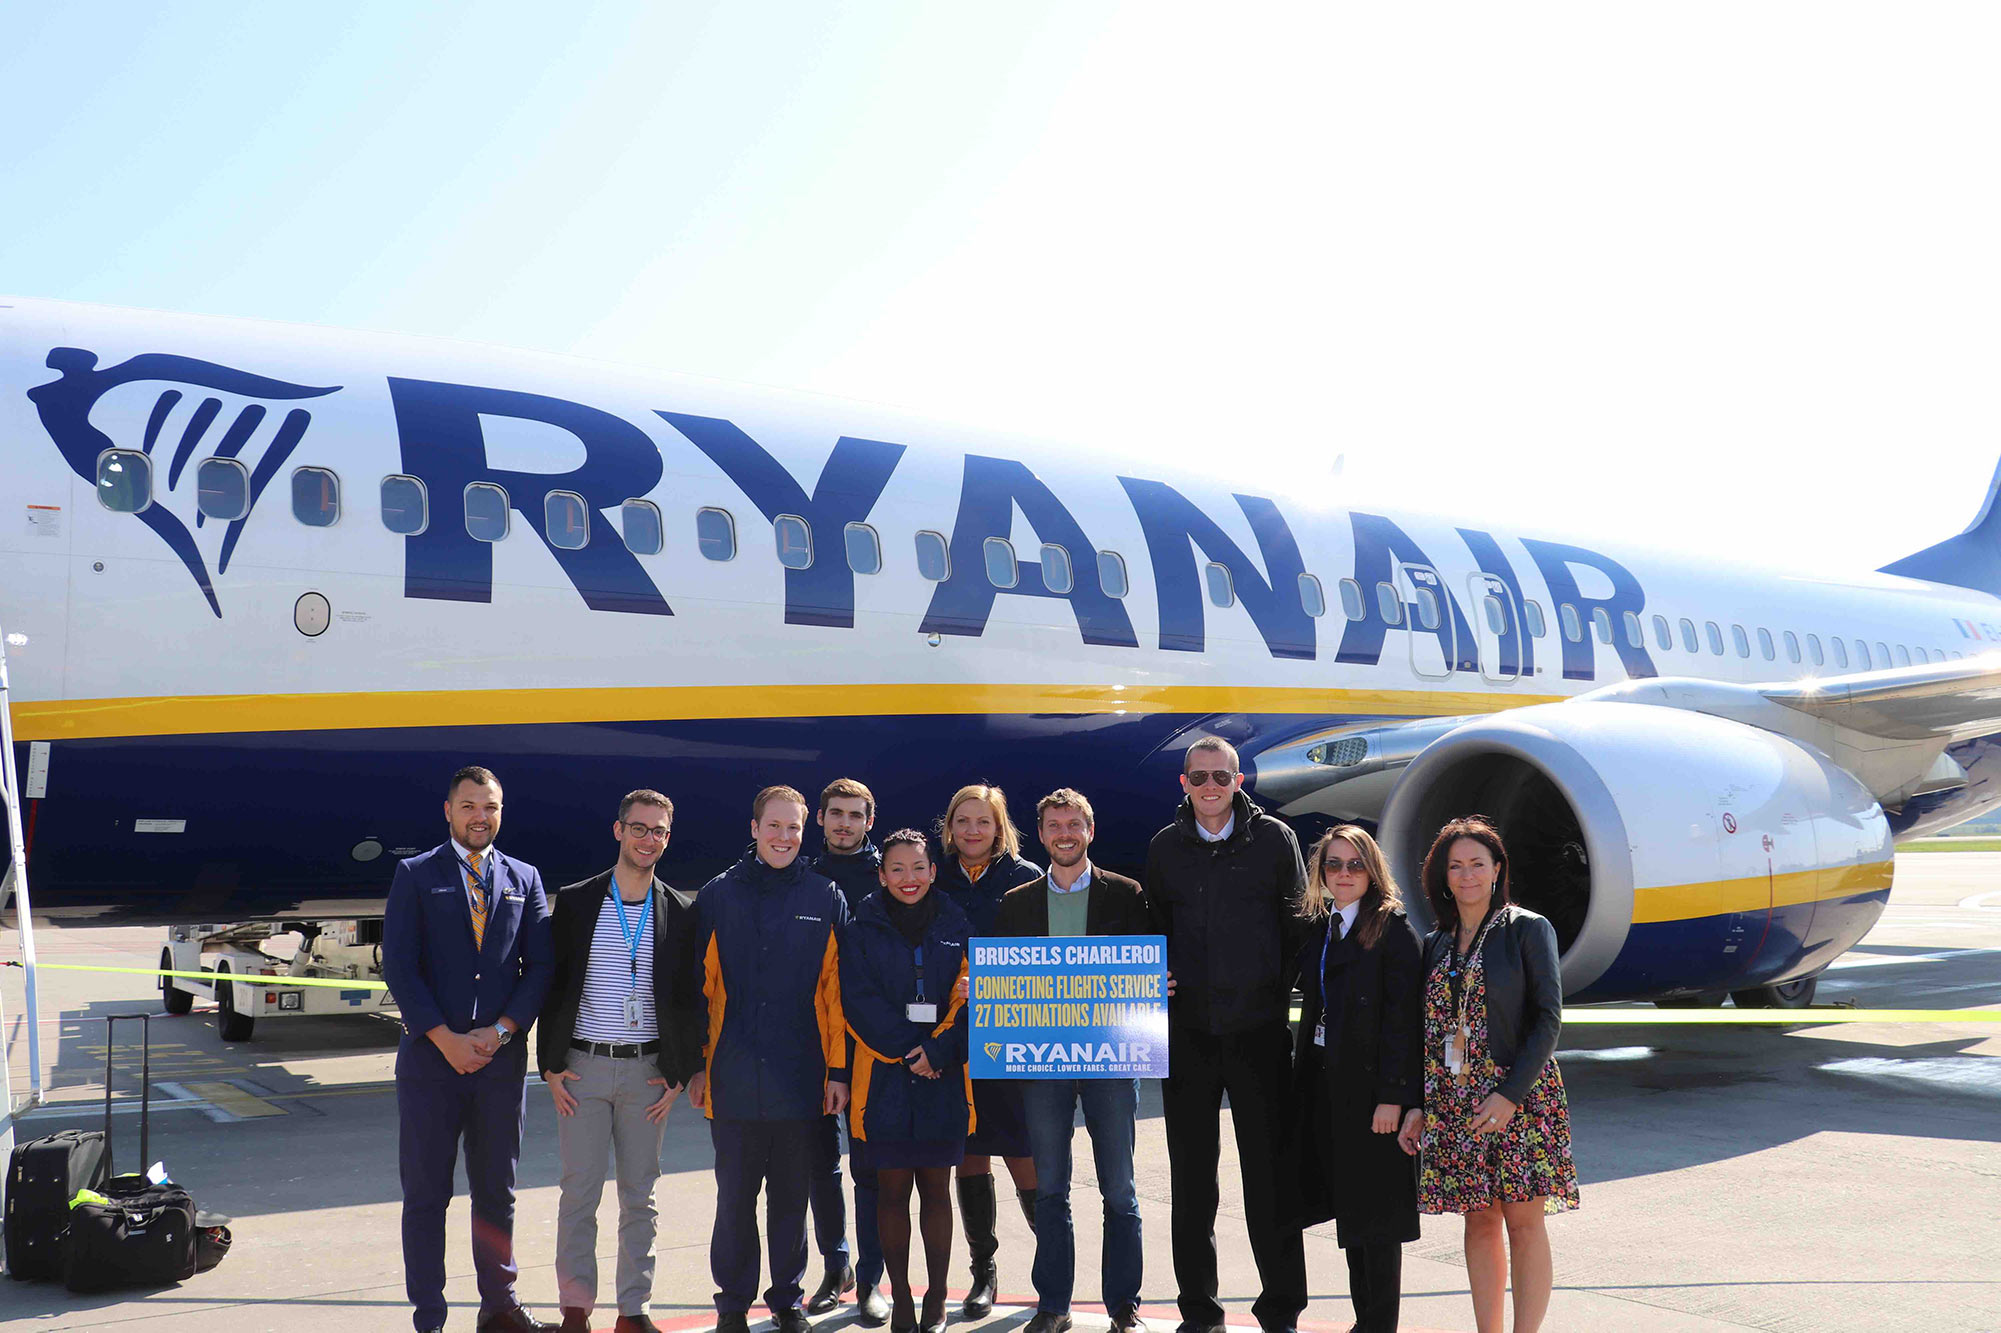 Ryanair Launches Connecting Flights Service  From Brussels Charleroi With 27 Routes